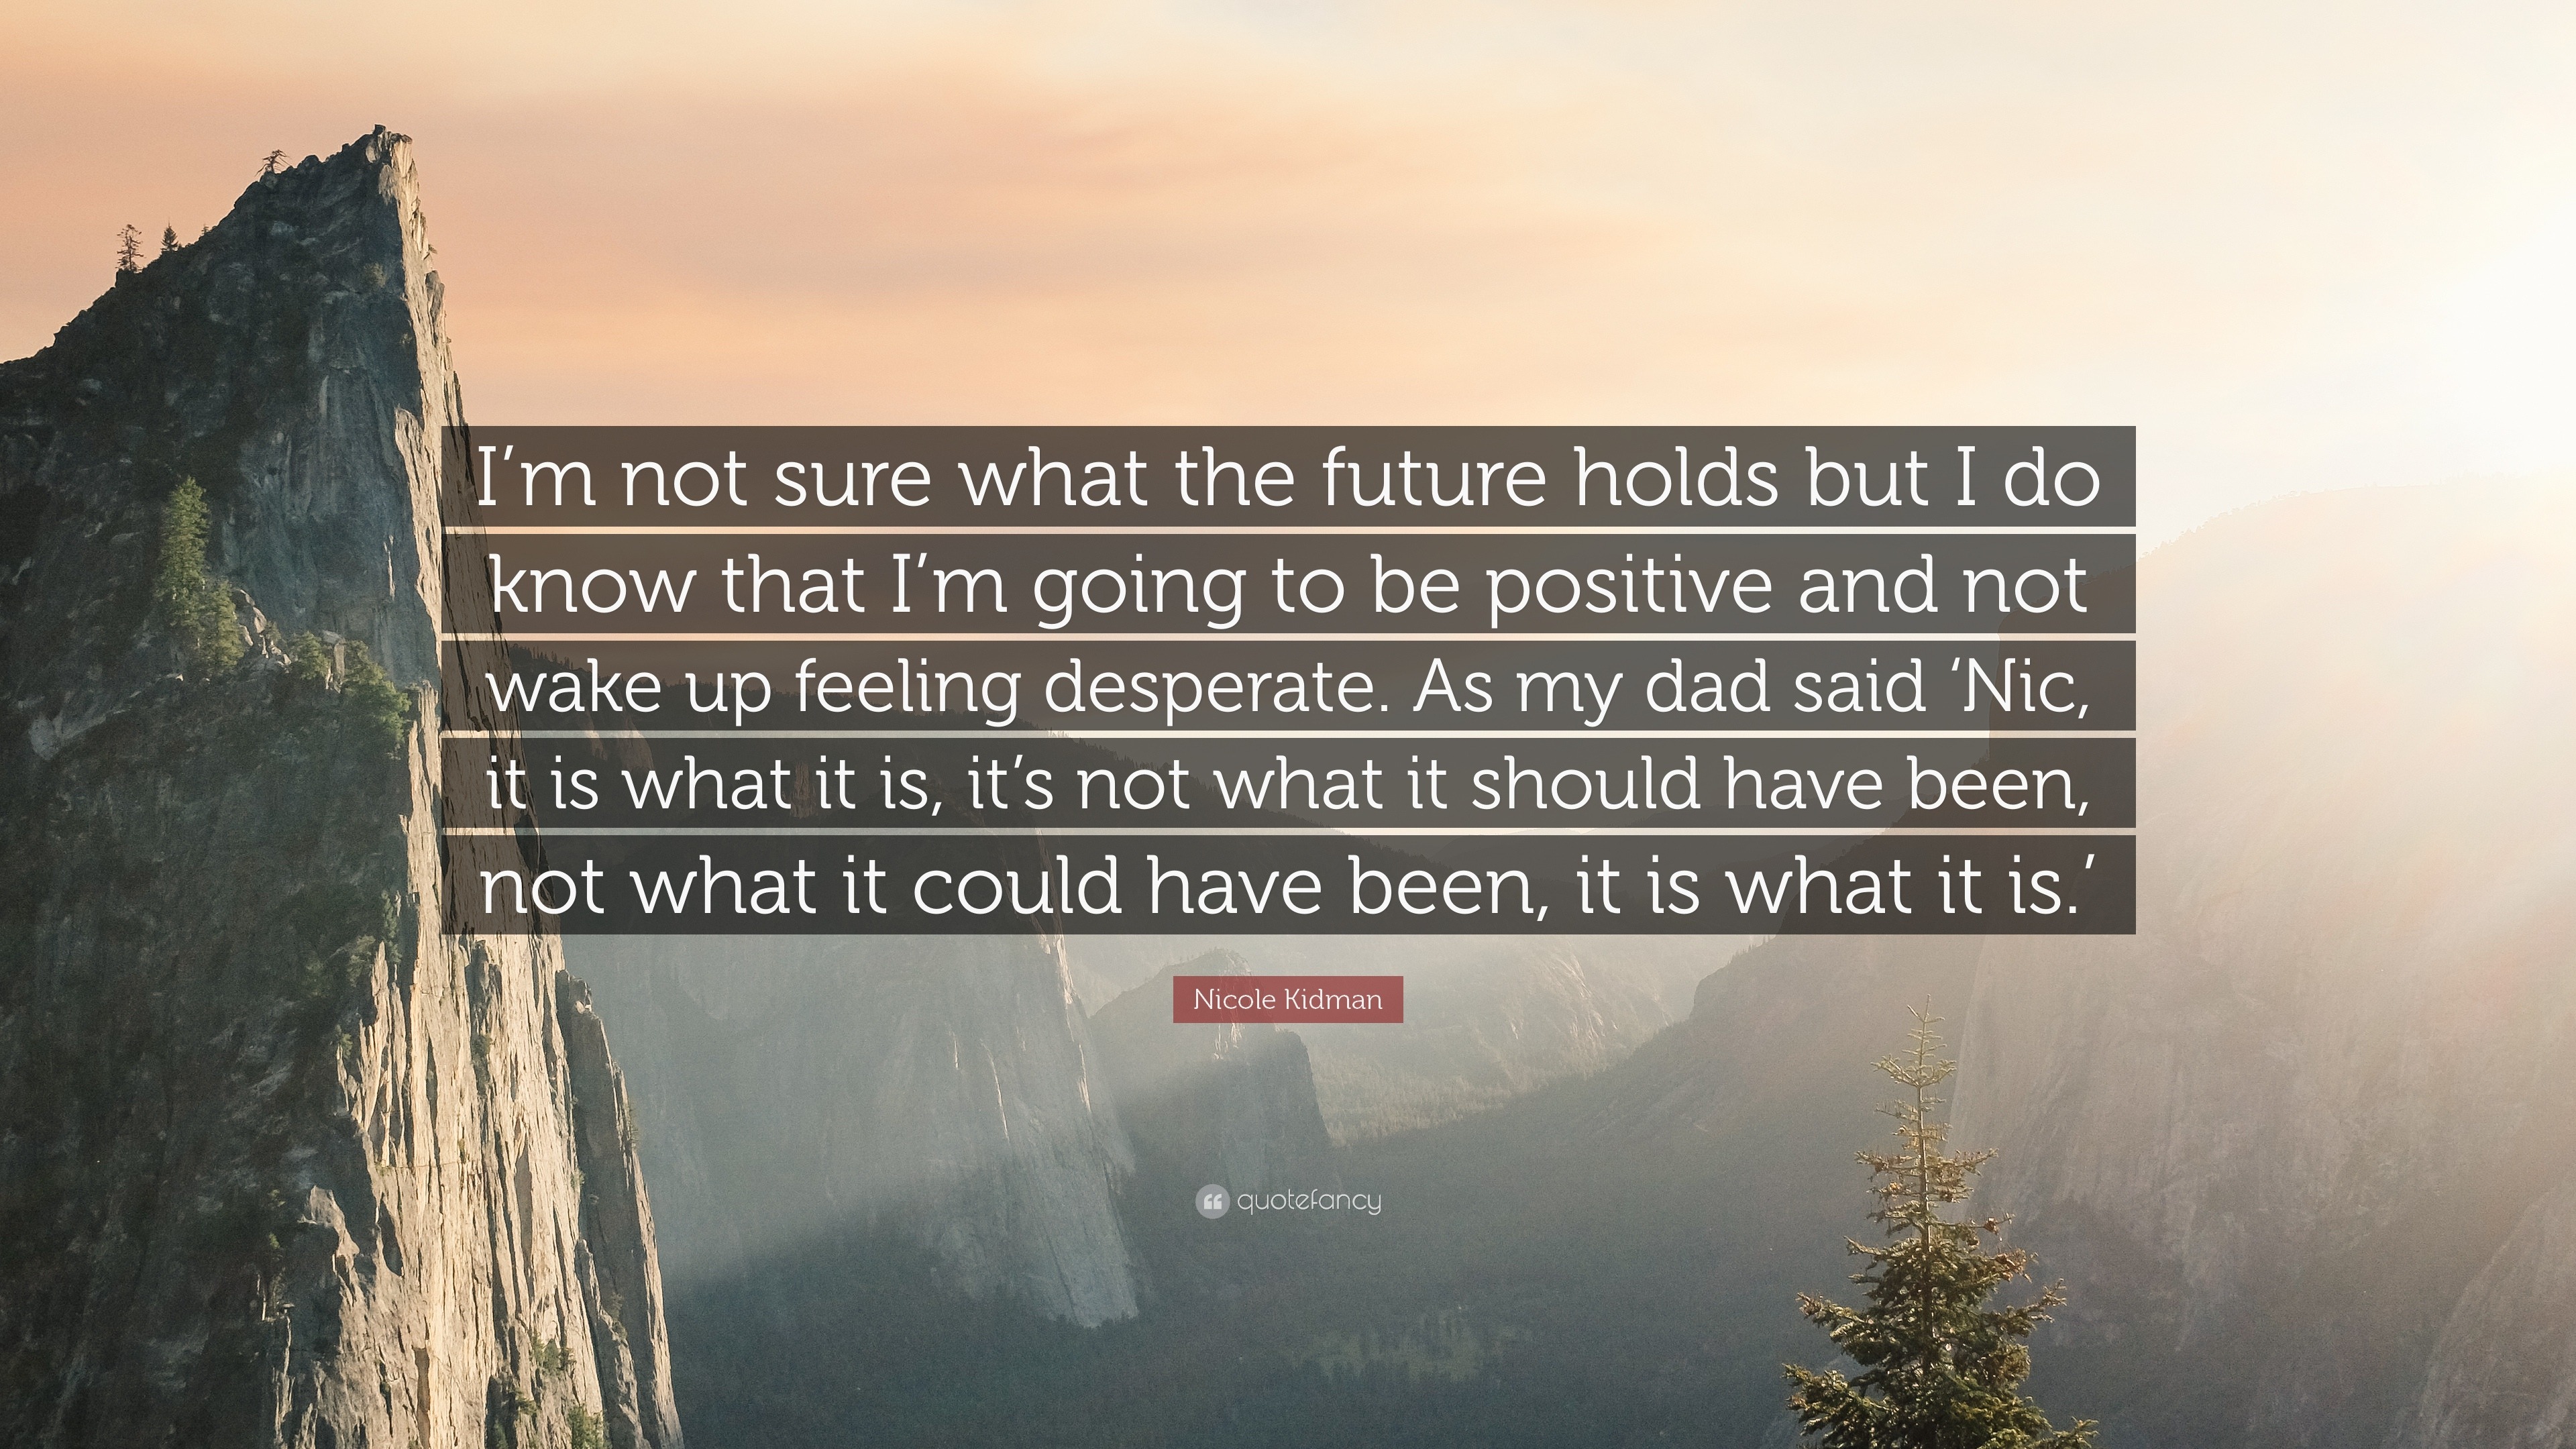 Nicole Kidman Quote: “I'm Not Sure What The Future Holds But I Do Know That I'm Going To Be Positive And Not Wake Up Feeling Desperate. As My ...”